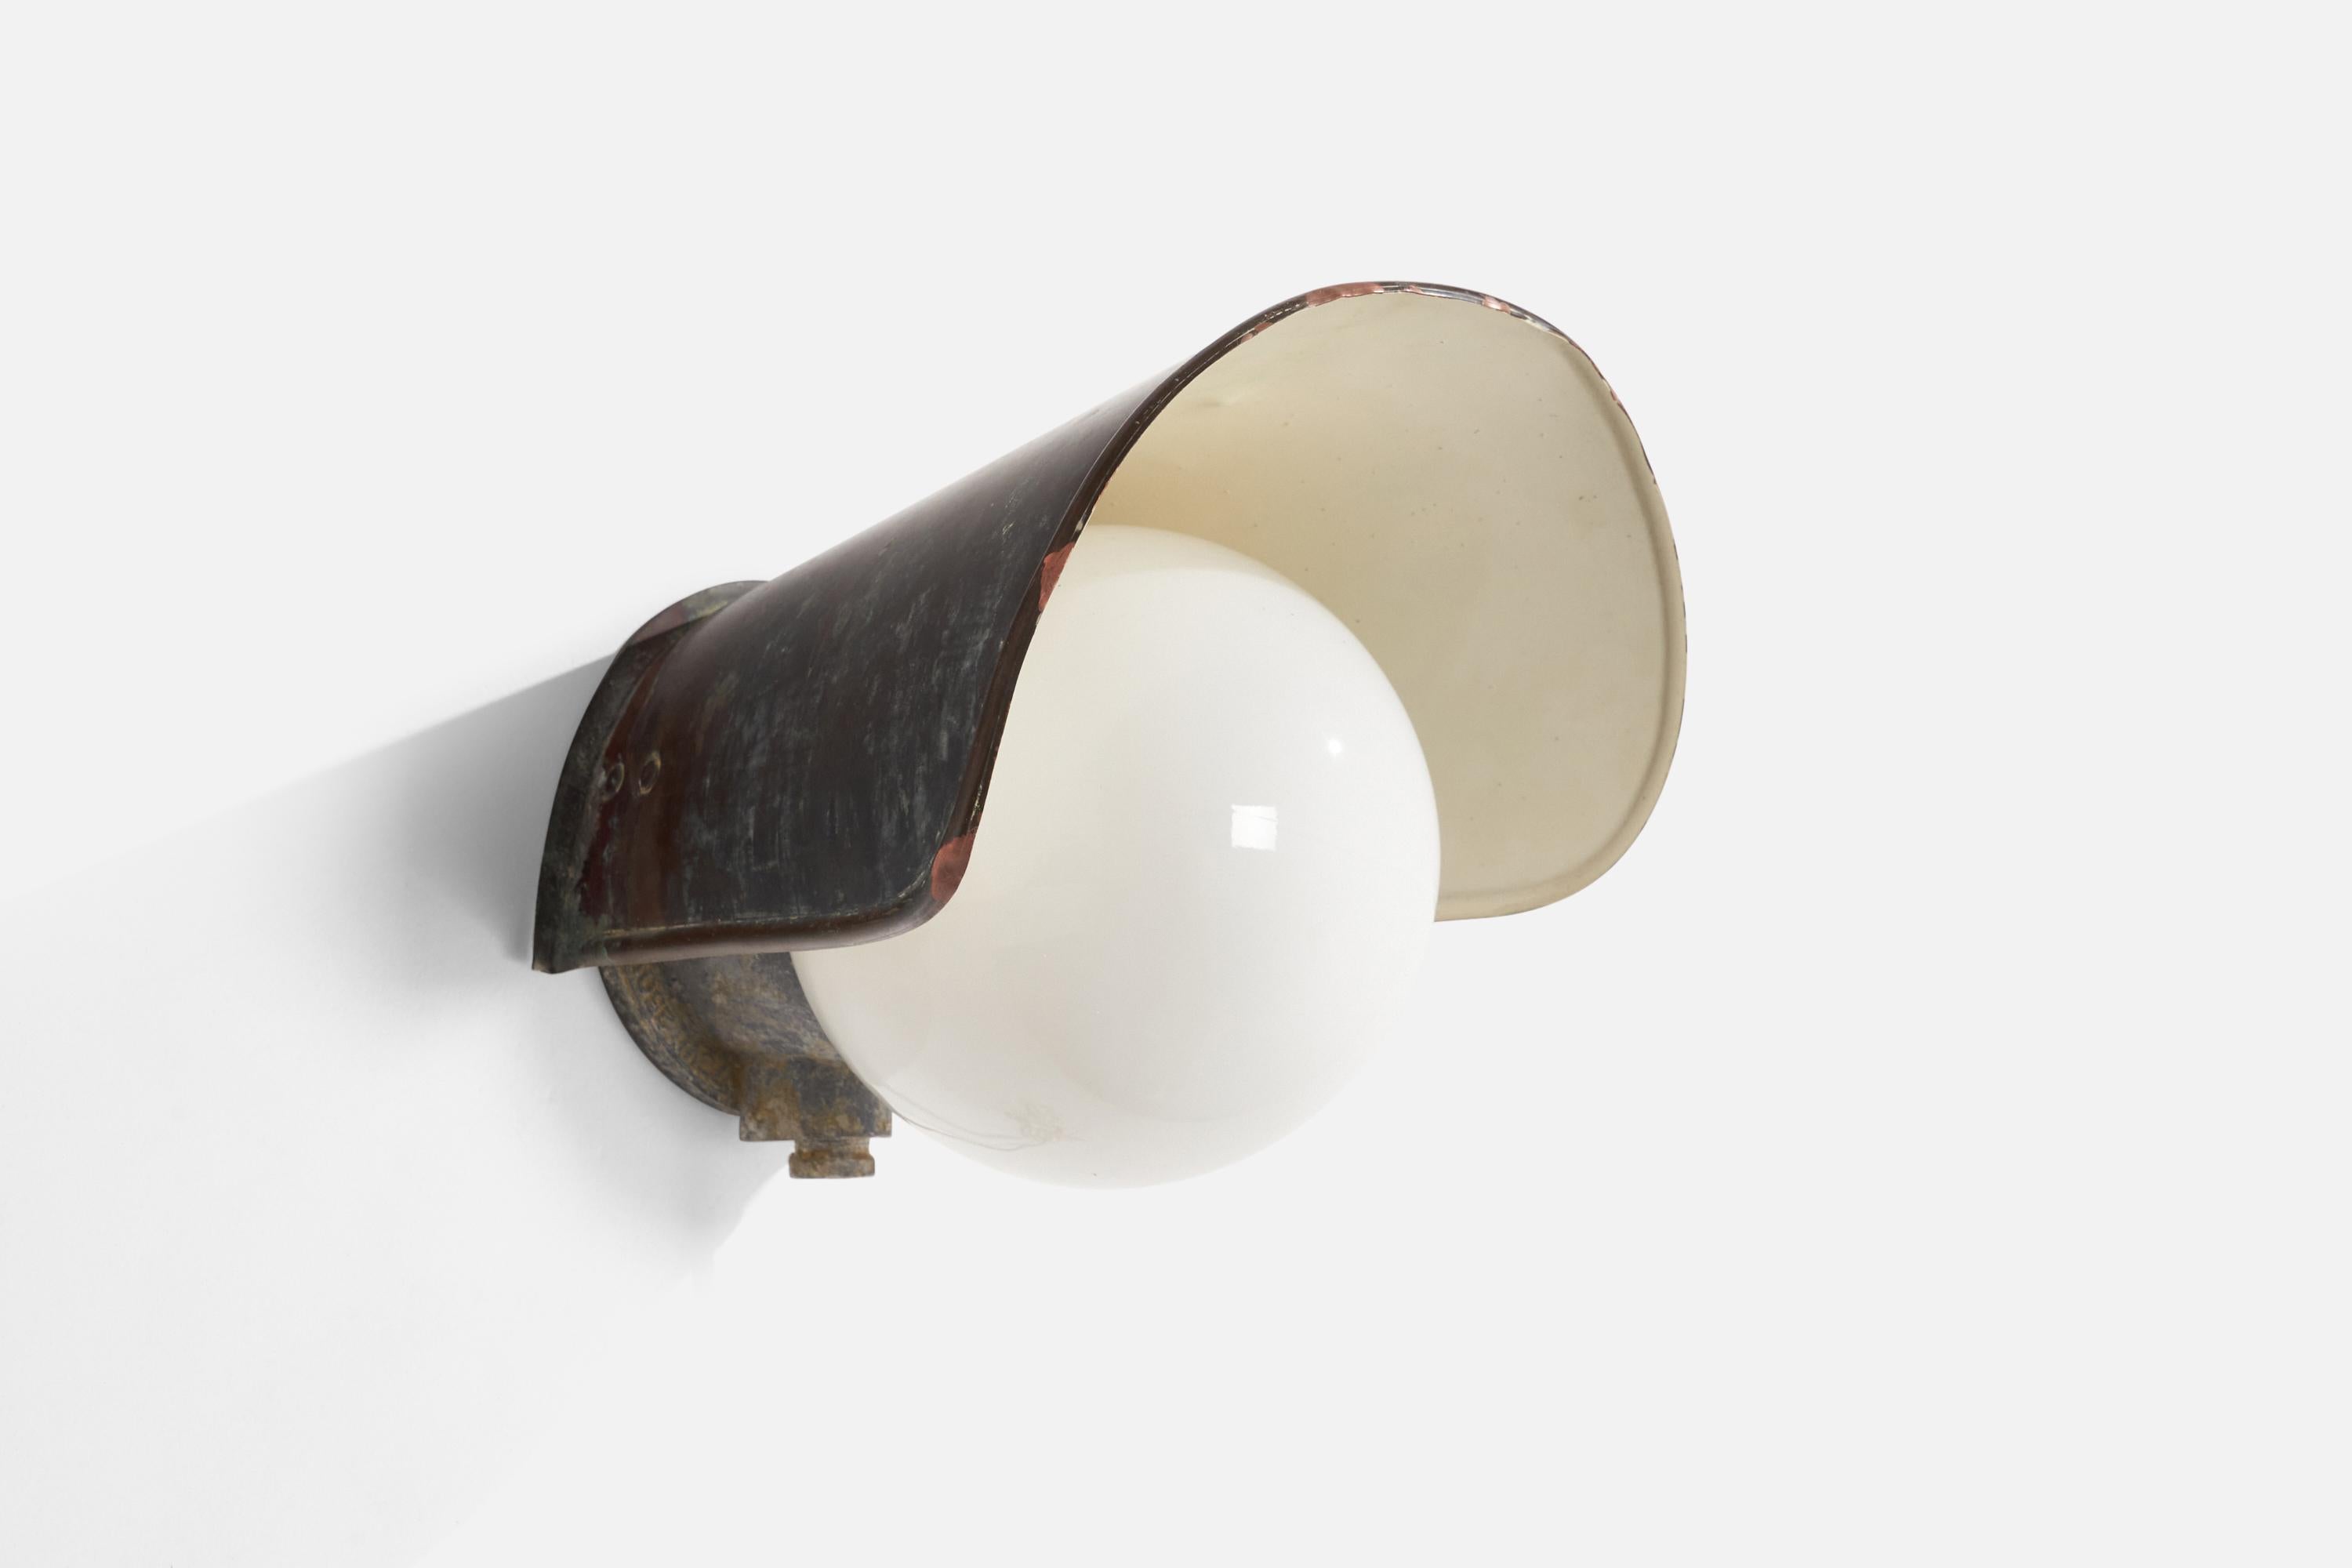 An opaline glass and lacquered copper wall light designed and produced by Sähköliikkeiden Oy, Finland, 1930s.

Overall Dimensions (inches): 10.25” H x 11.25” W x 9.5” D
Back Plate Dimensions (inches): 5.5” H x 5.5” W x .25”  D
Bulb Specifications: